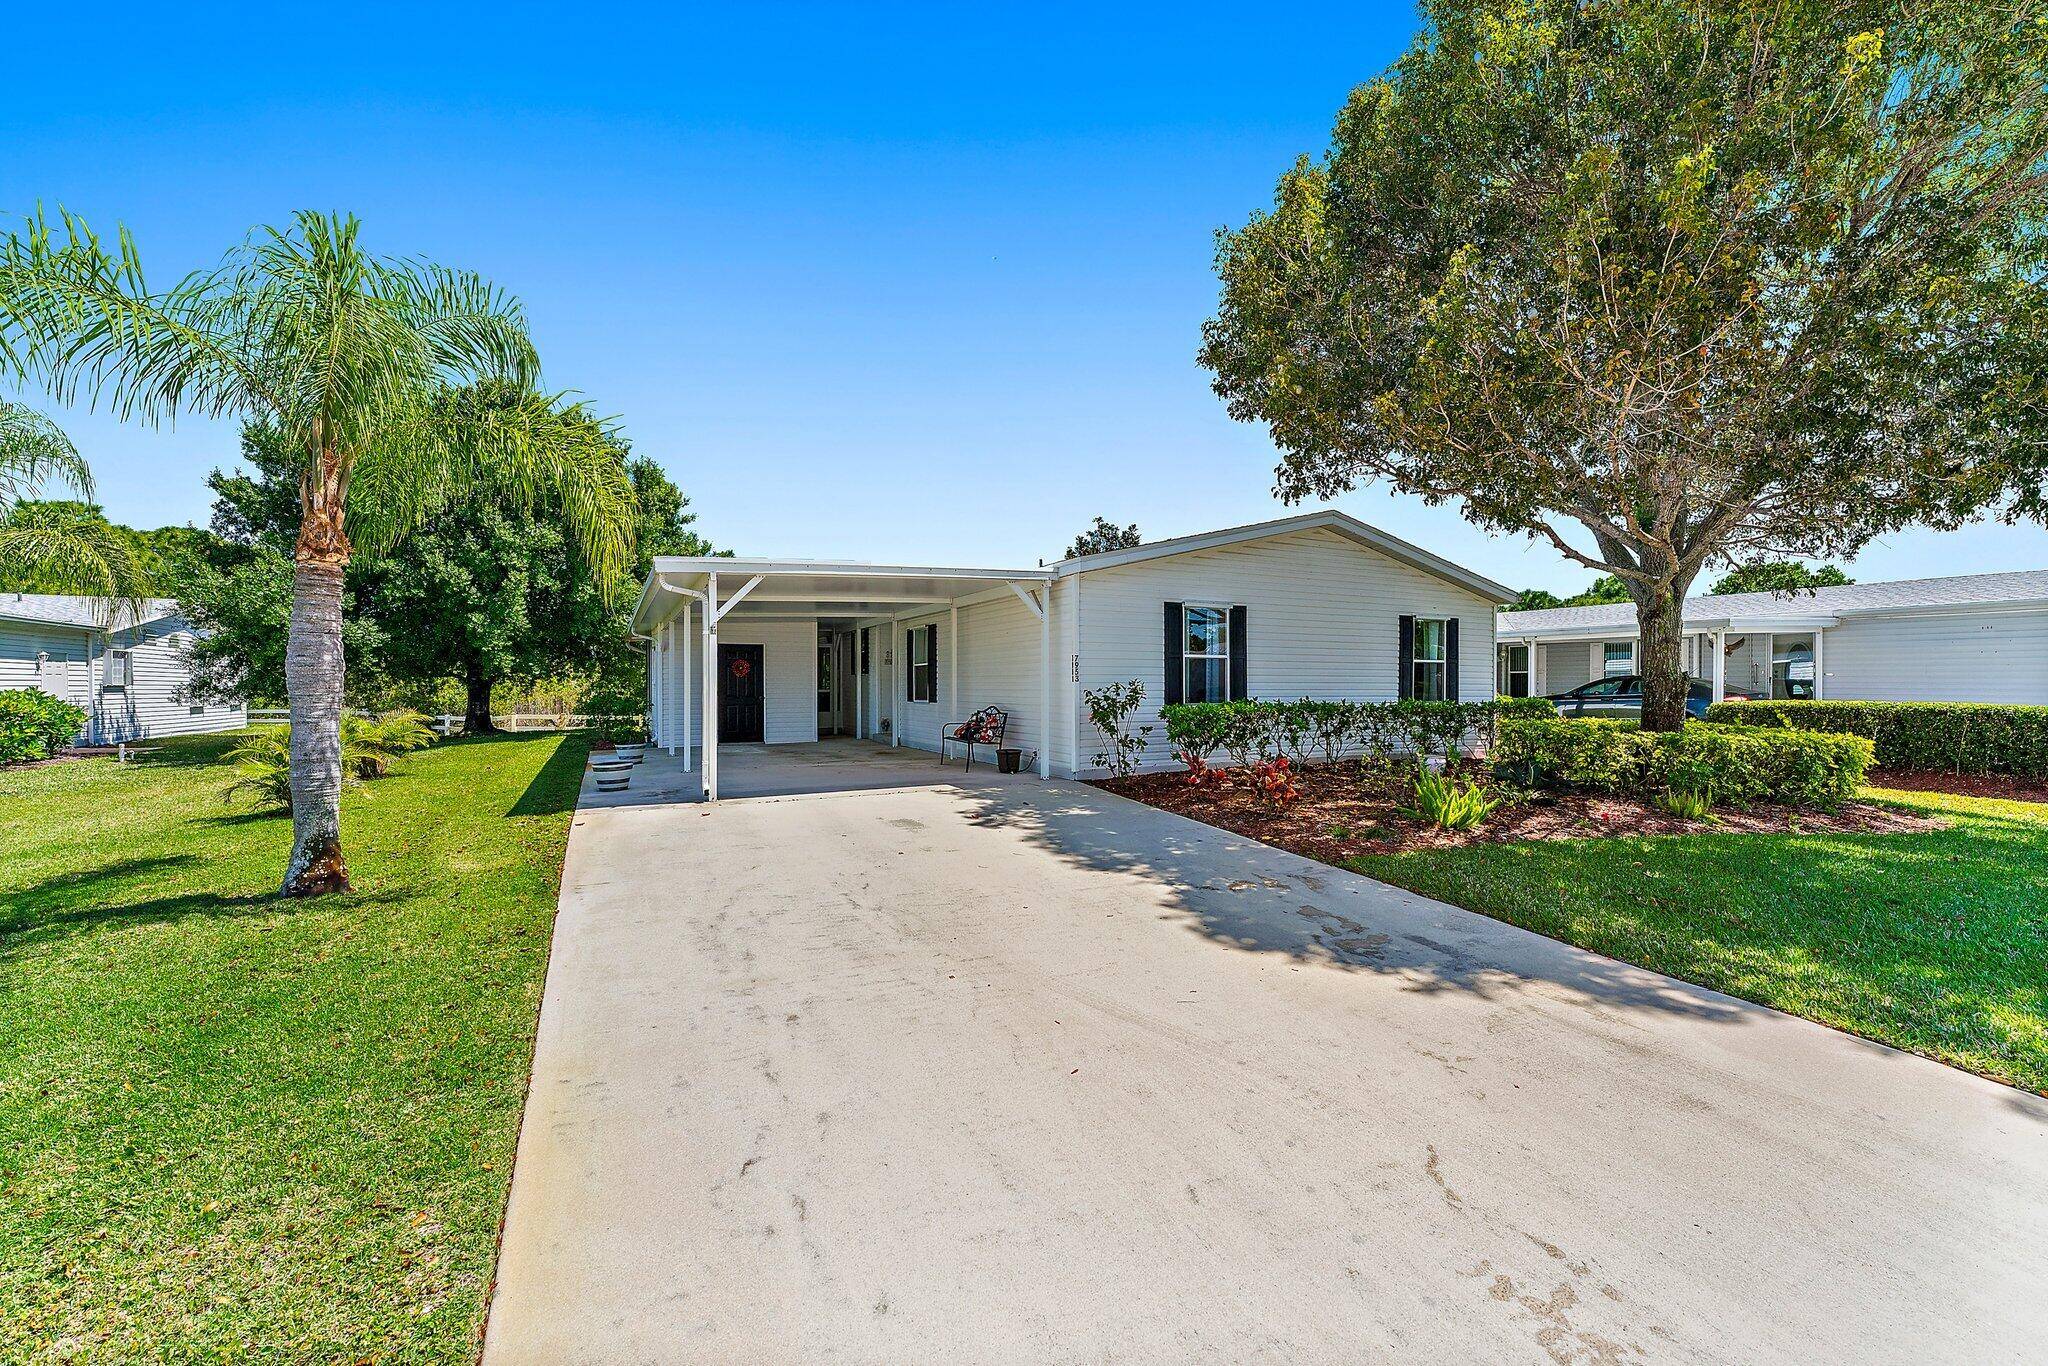 Welcome Home to this Preserve front property in the Savanna Club 55 community offering a unique combination of amenities with 2 clubhouses, 3 fully equipped gyms, an on site restaurant, ...